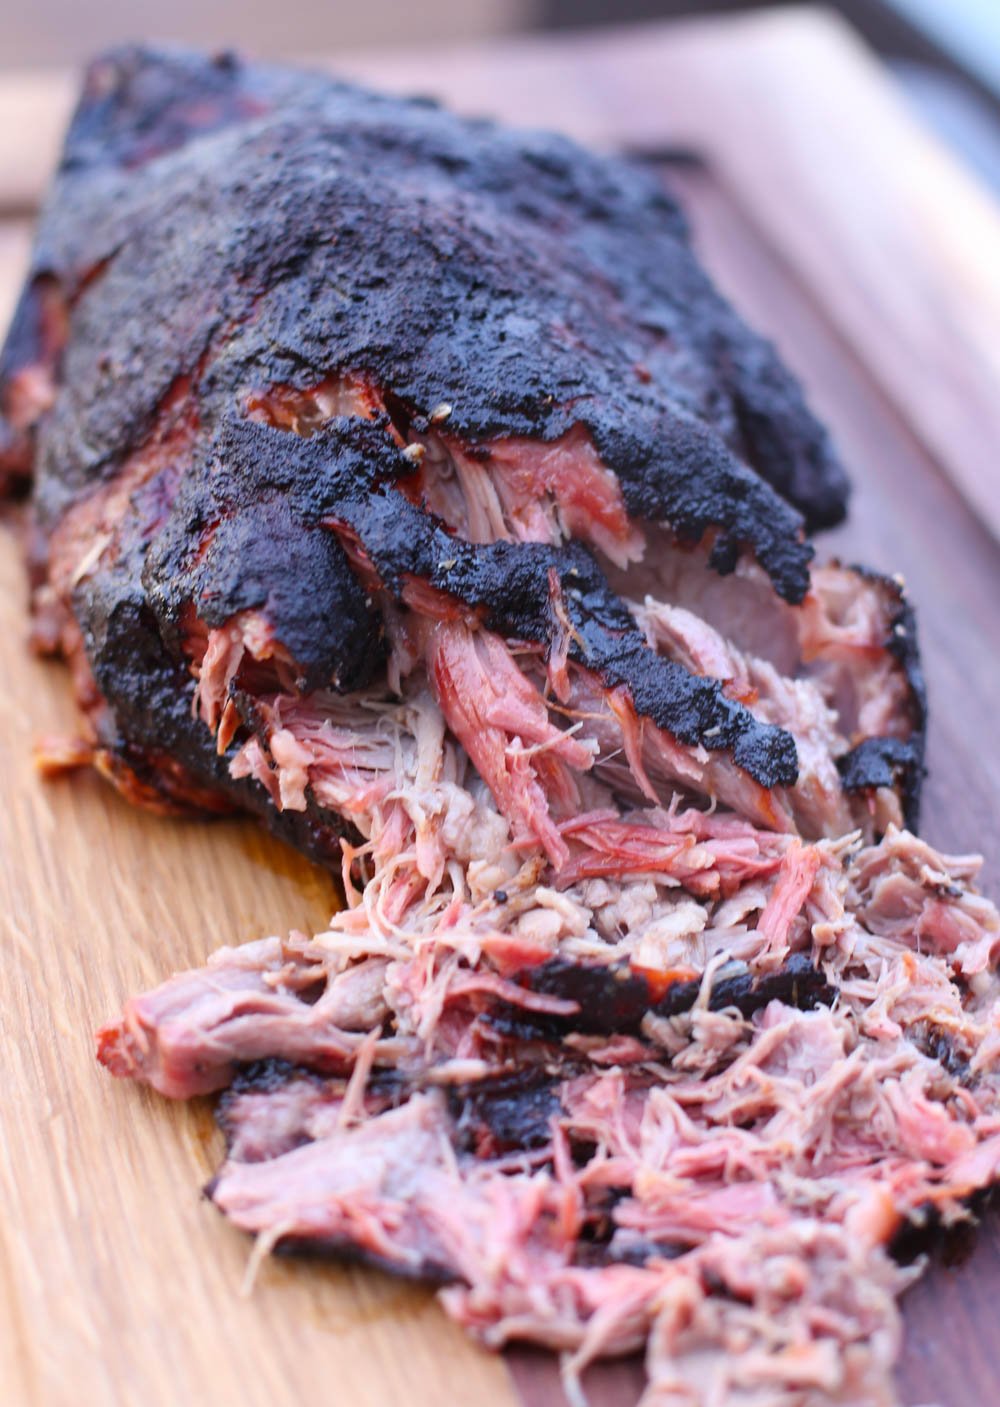 Simple Smoked Pulled Pork Butt (Smoked Pork Shoulder)